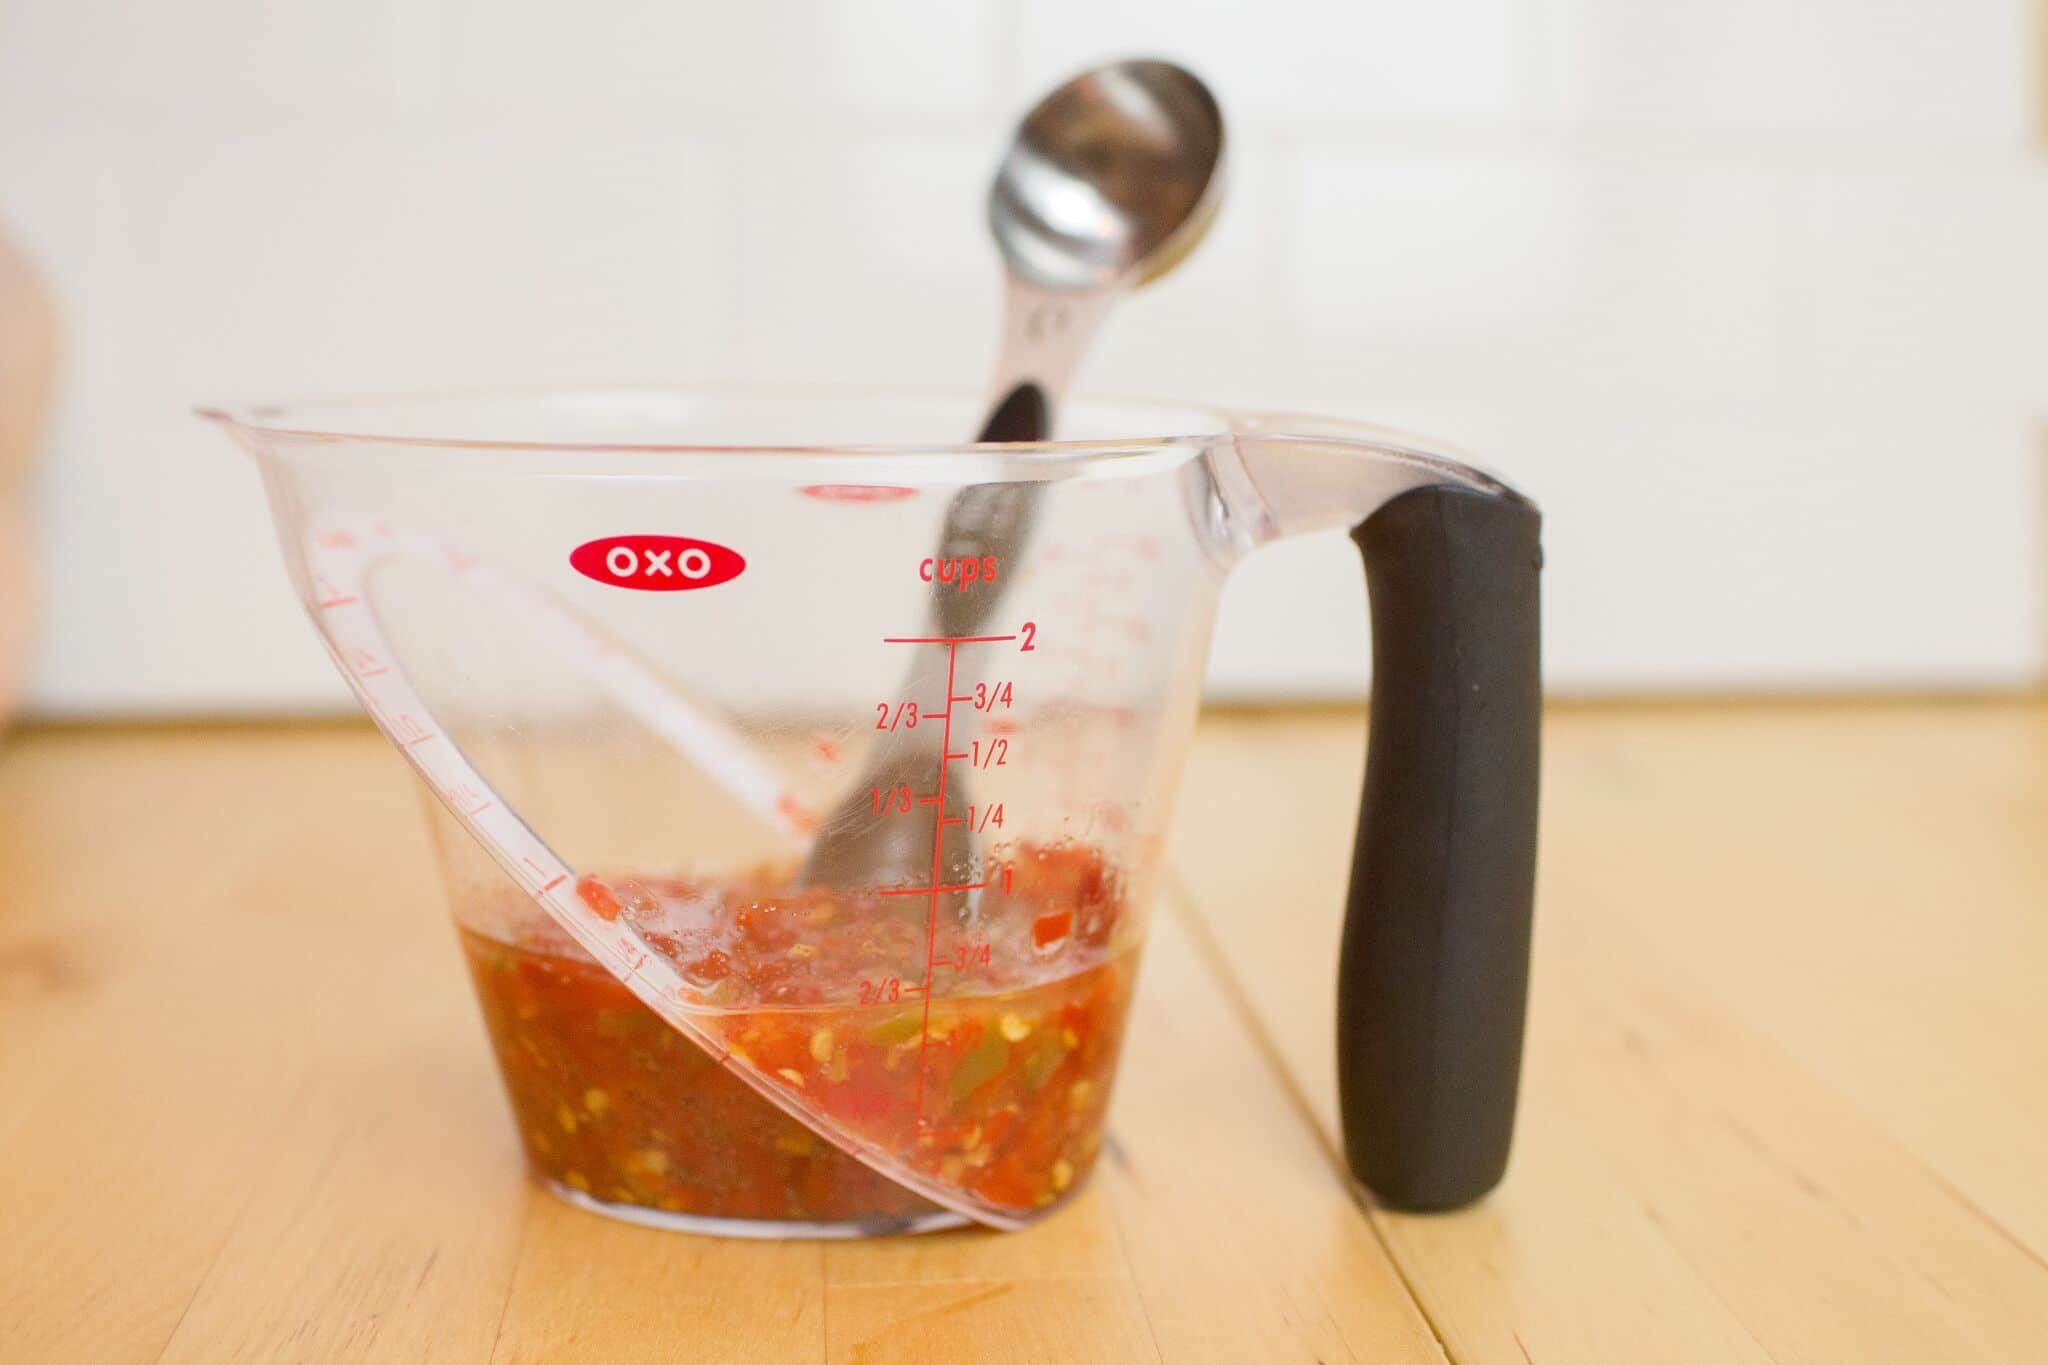 Mix together the pepper spread and olive oil in a measuring cup